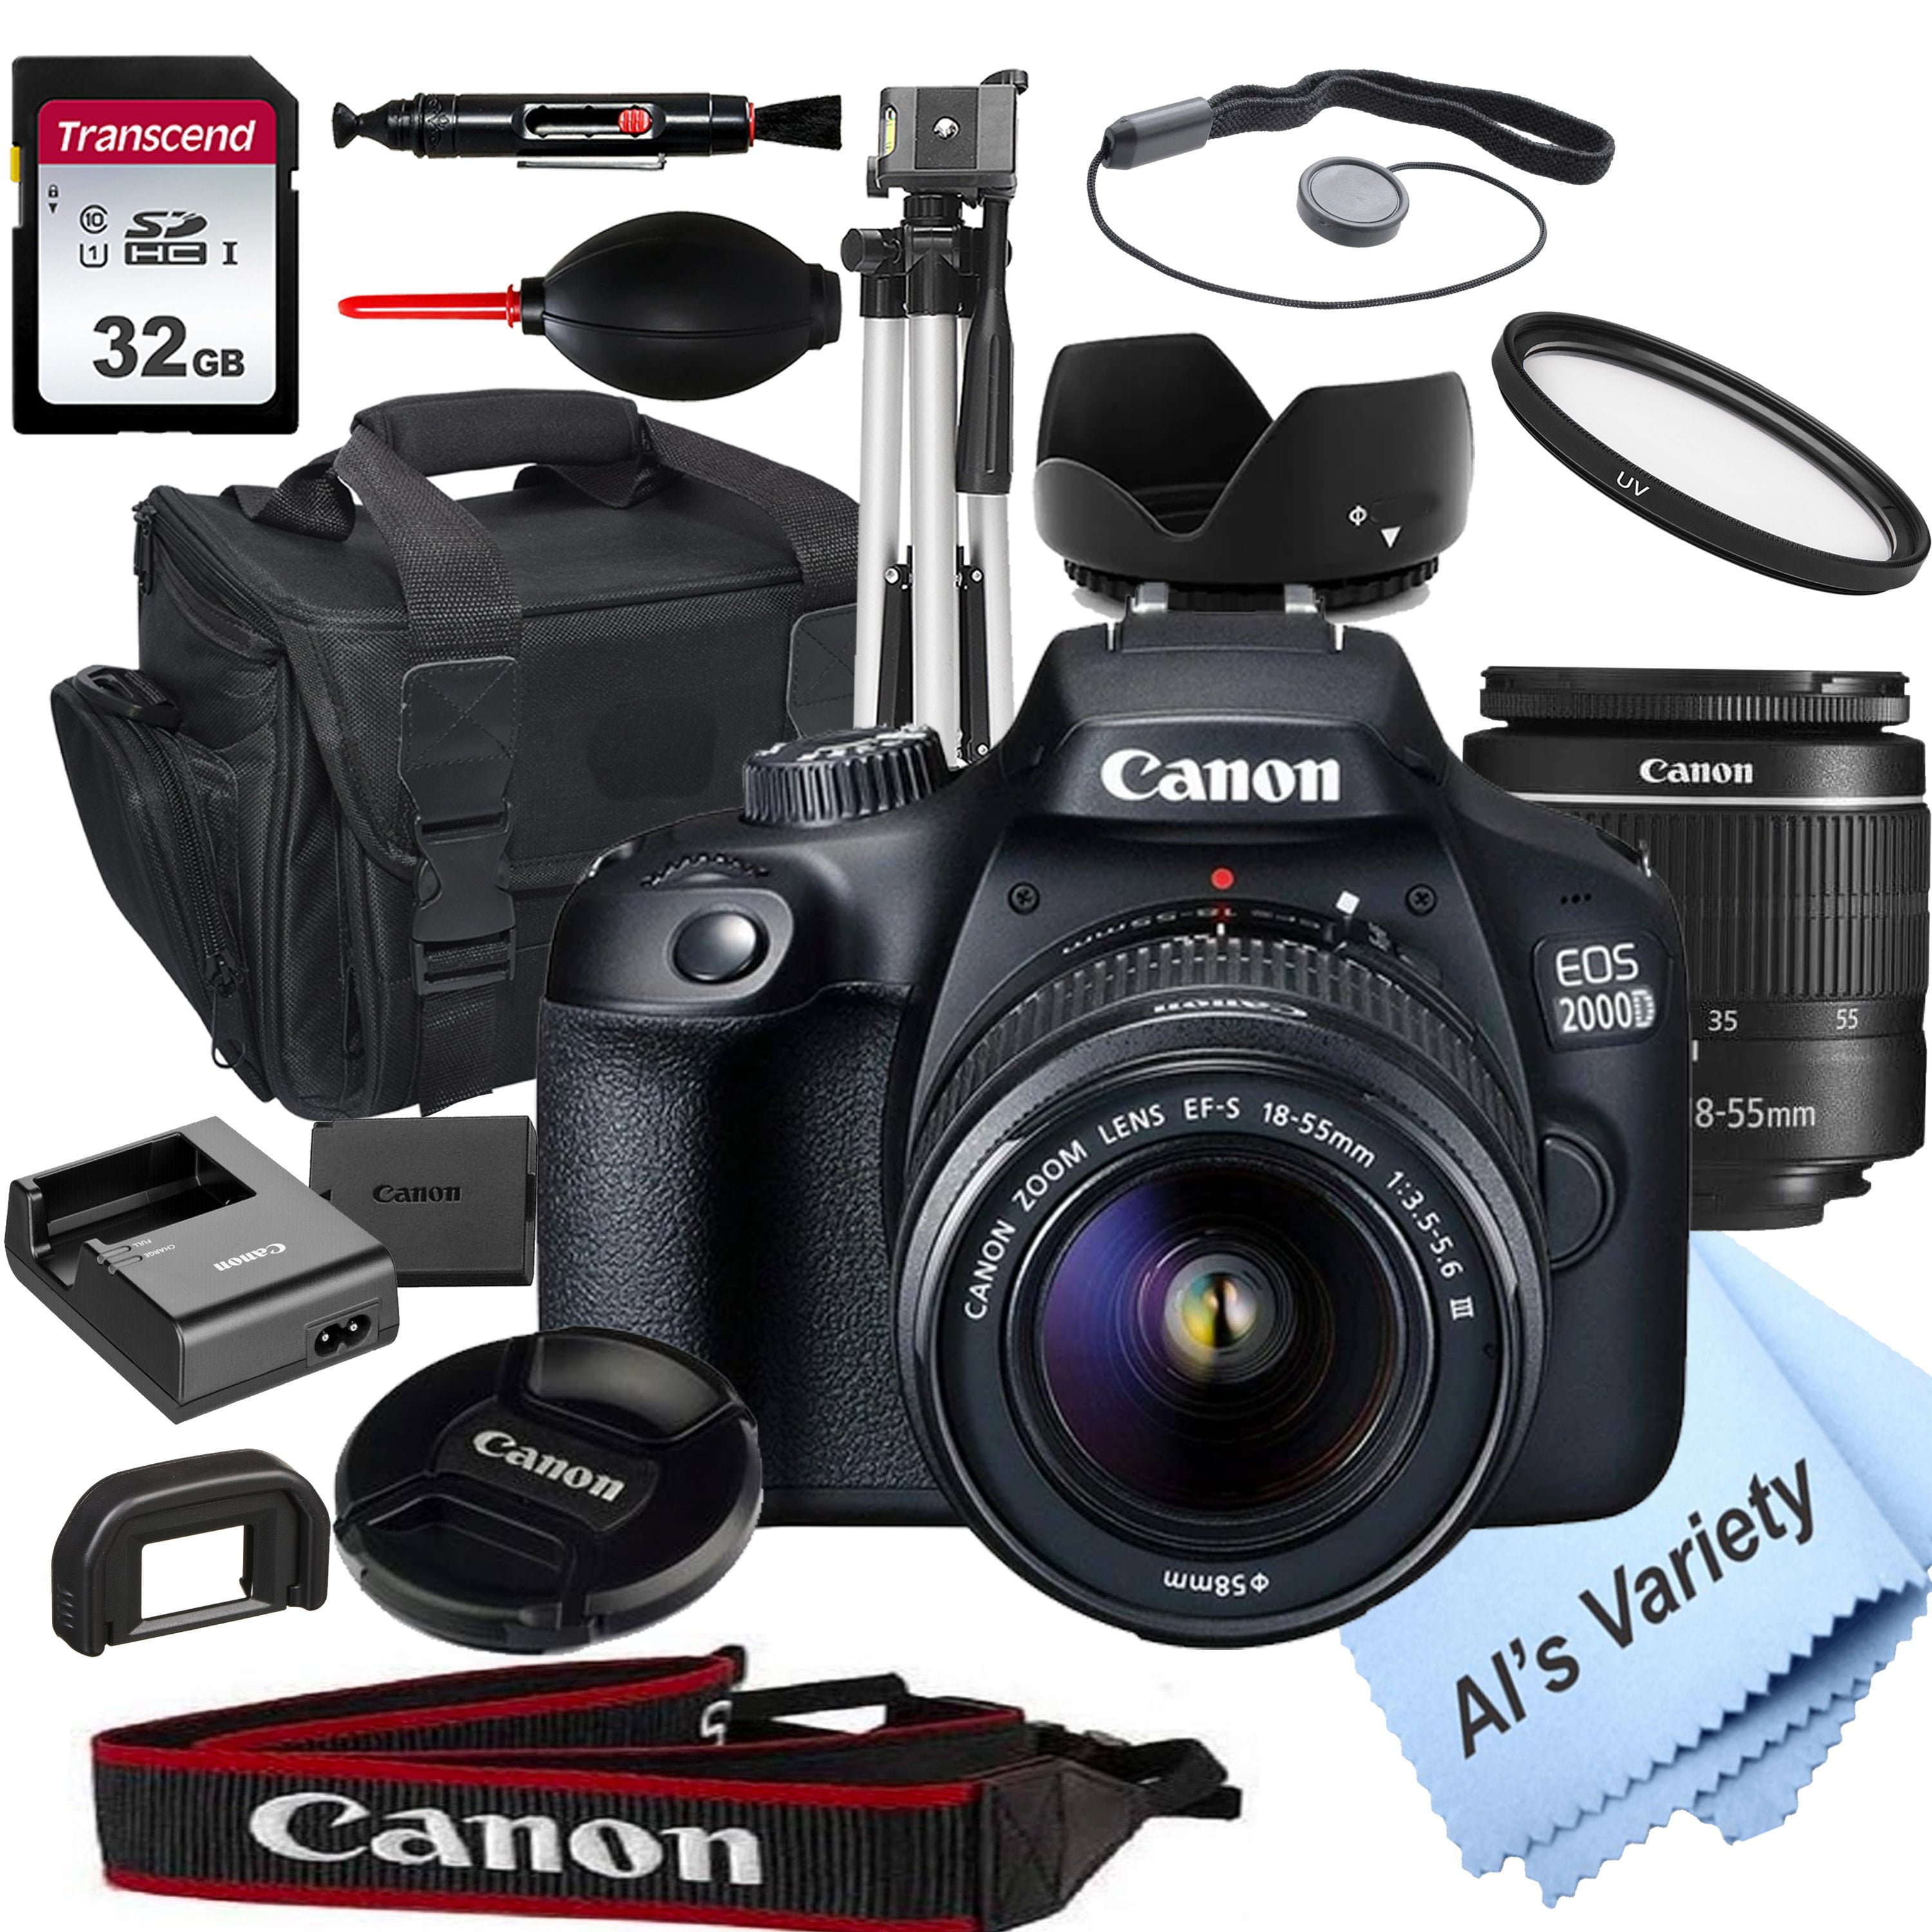 28pc Bundle 64GB Memory,Case Canon EOS Rebel SL3 DSLR Camera with 18-55mm f/4-5.6 is STM Zoom Lens  Tripod and More 